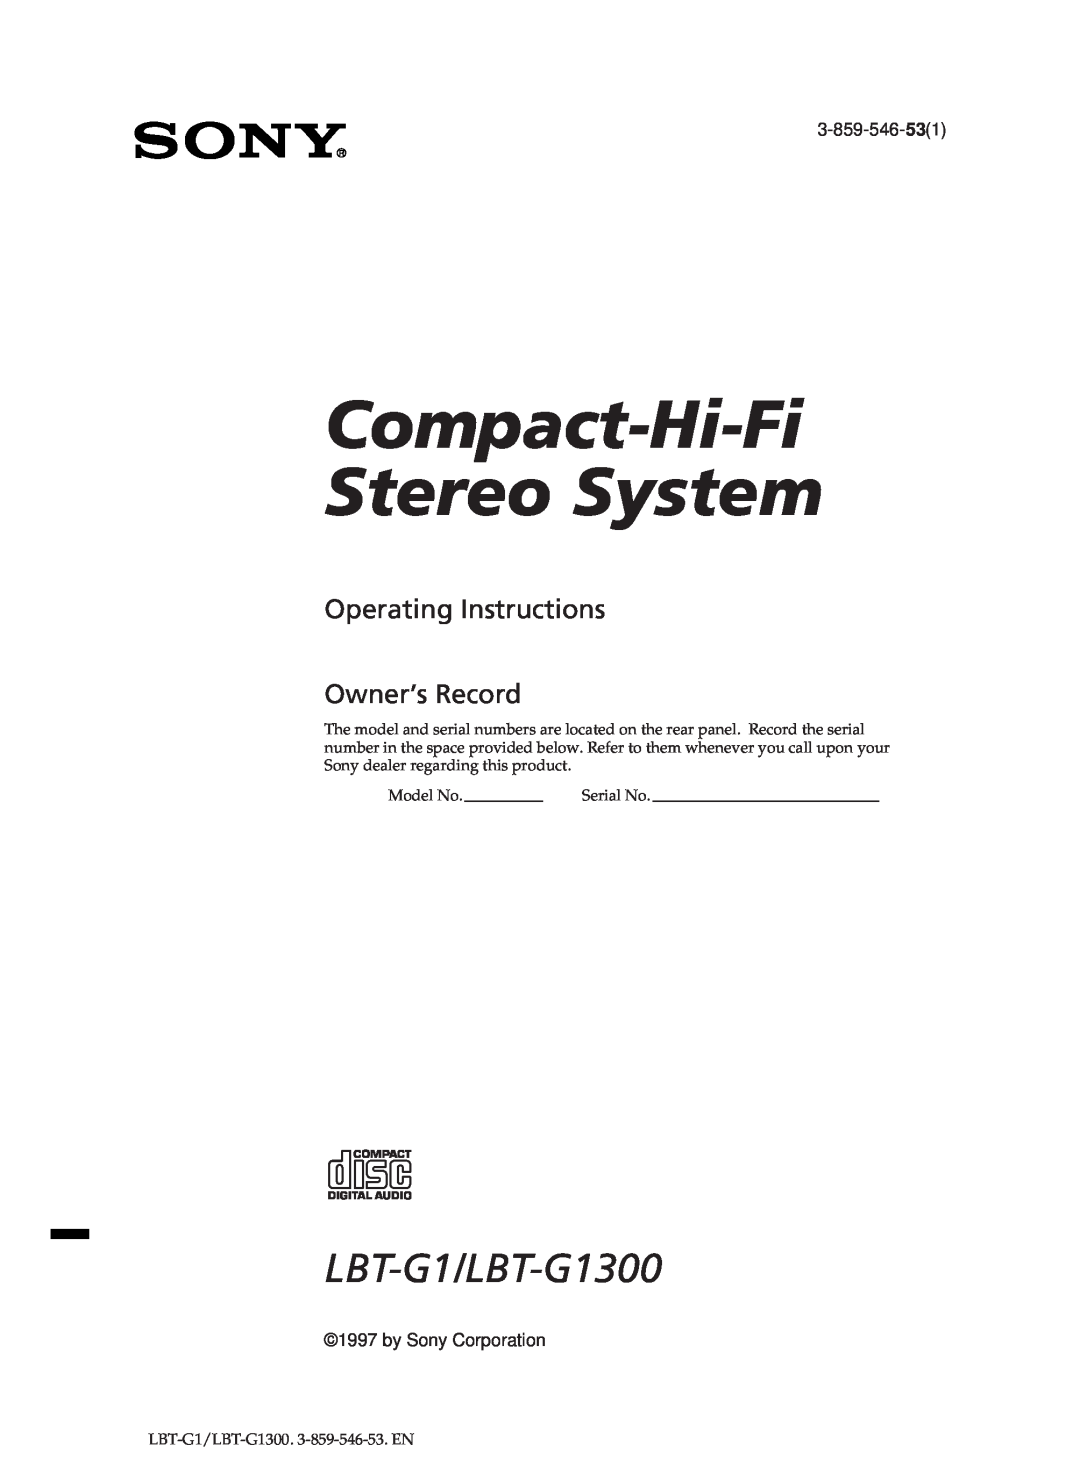 Sony manual Compact-Hi-Fi Stereo System, LBT-G1/LBT-G1300, Operating Instructions Owner’s Record, 3-859-546-531 